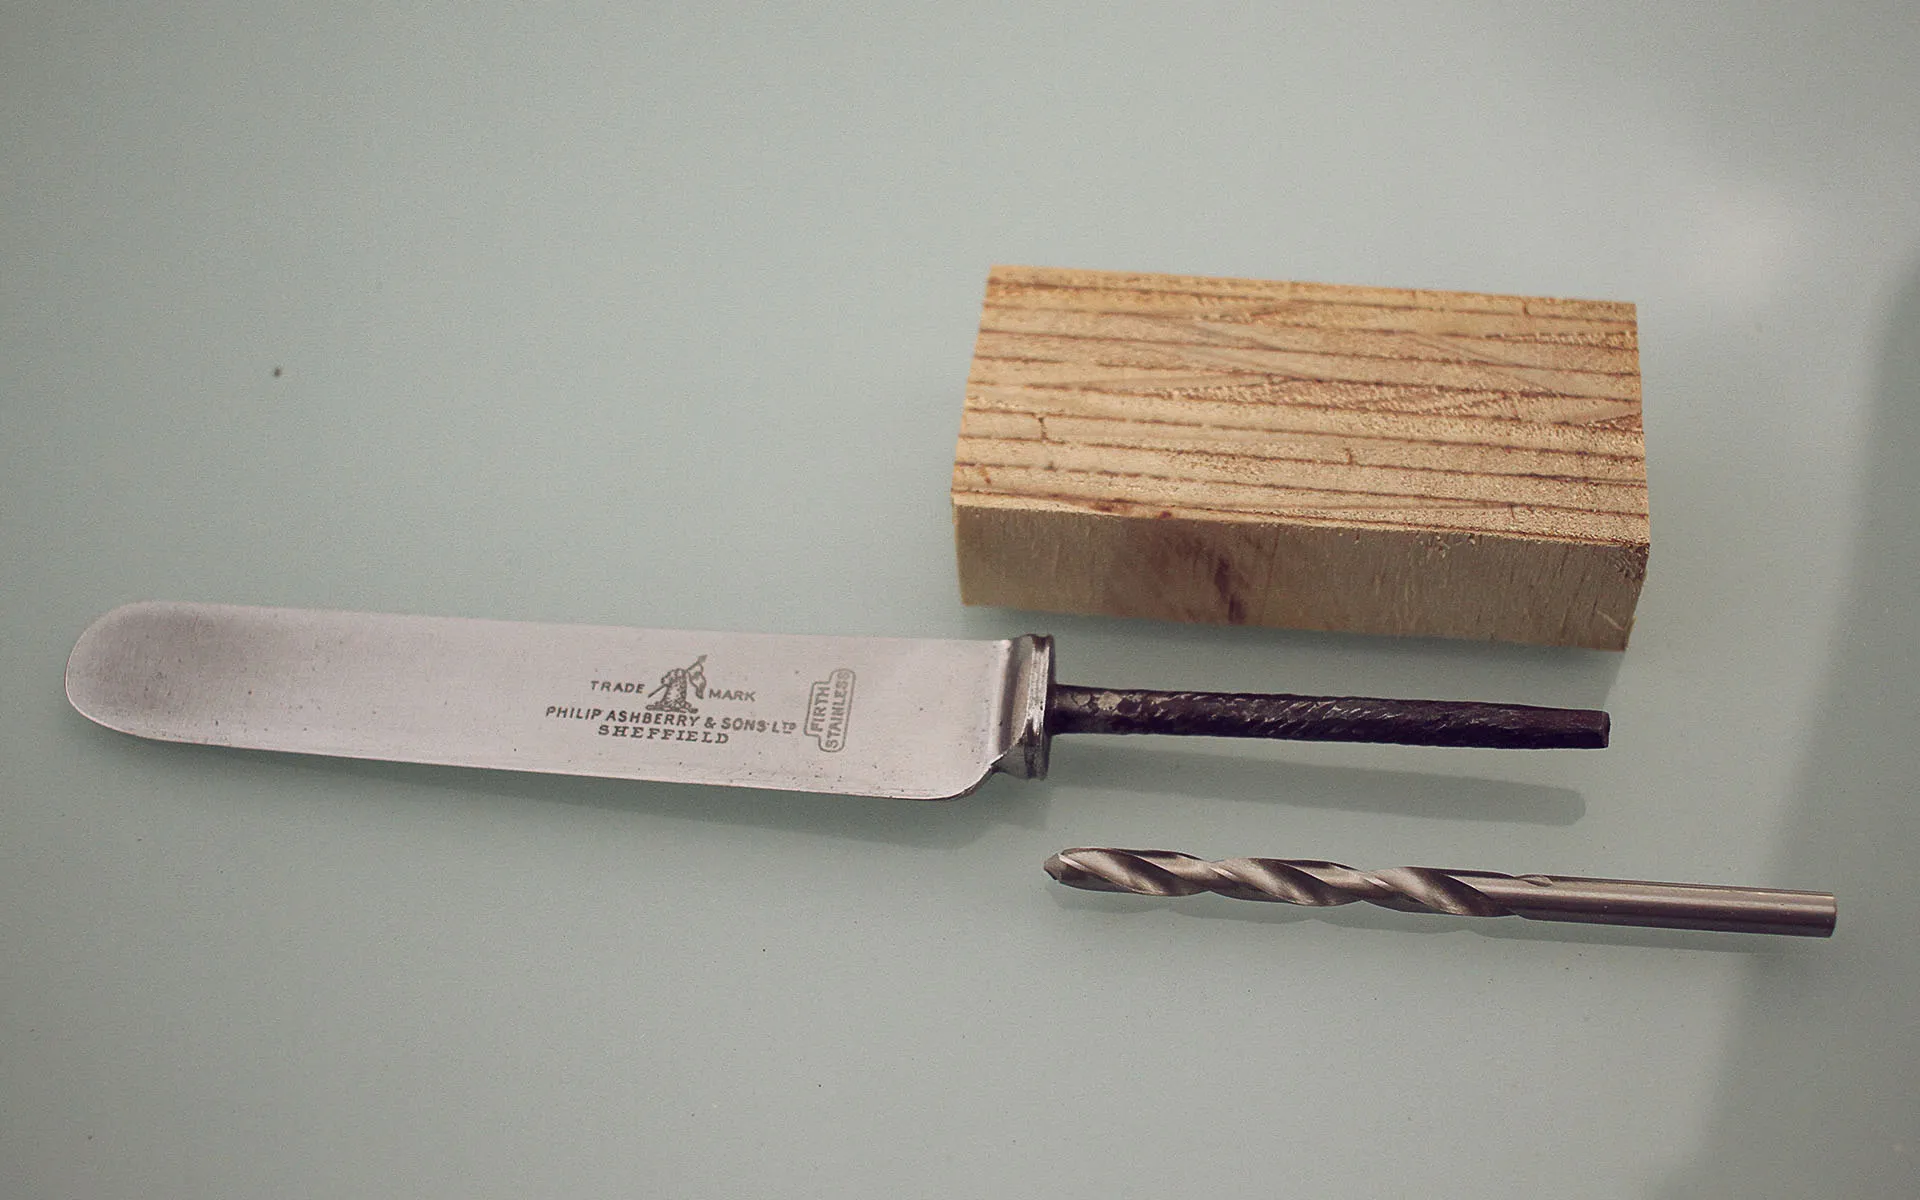 Knife blade without handle next to a block of wood and a drill bit.